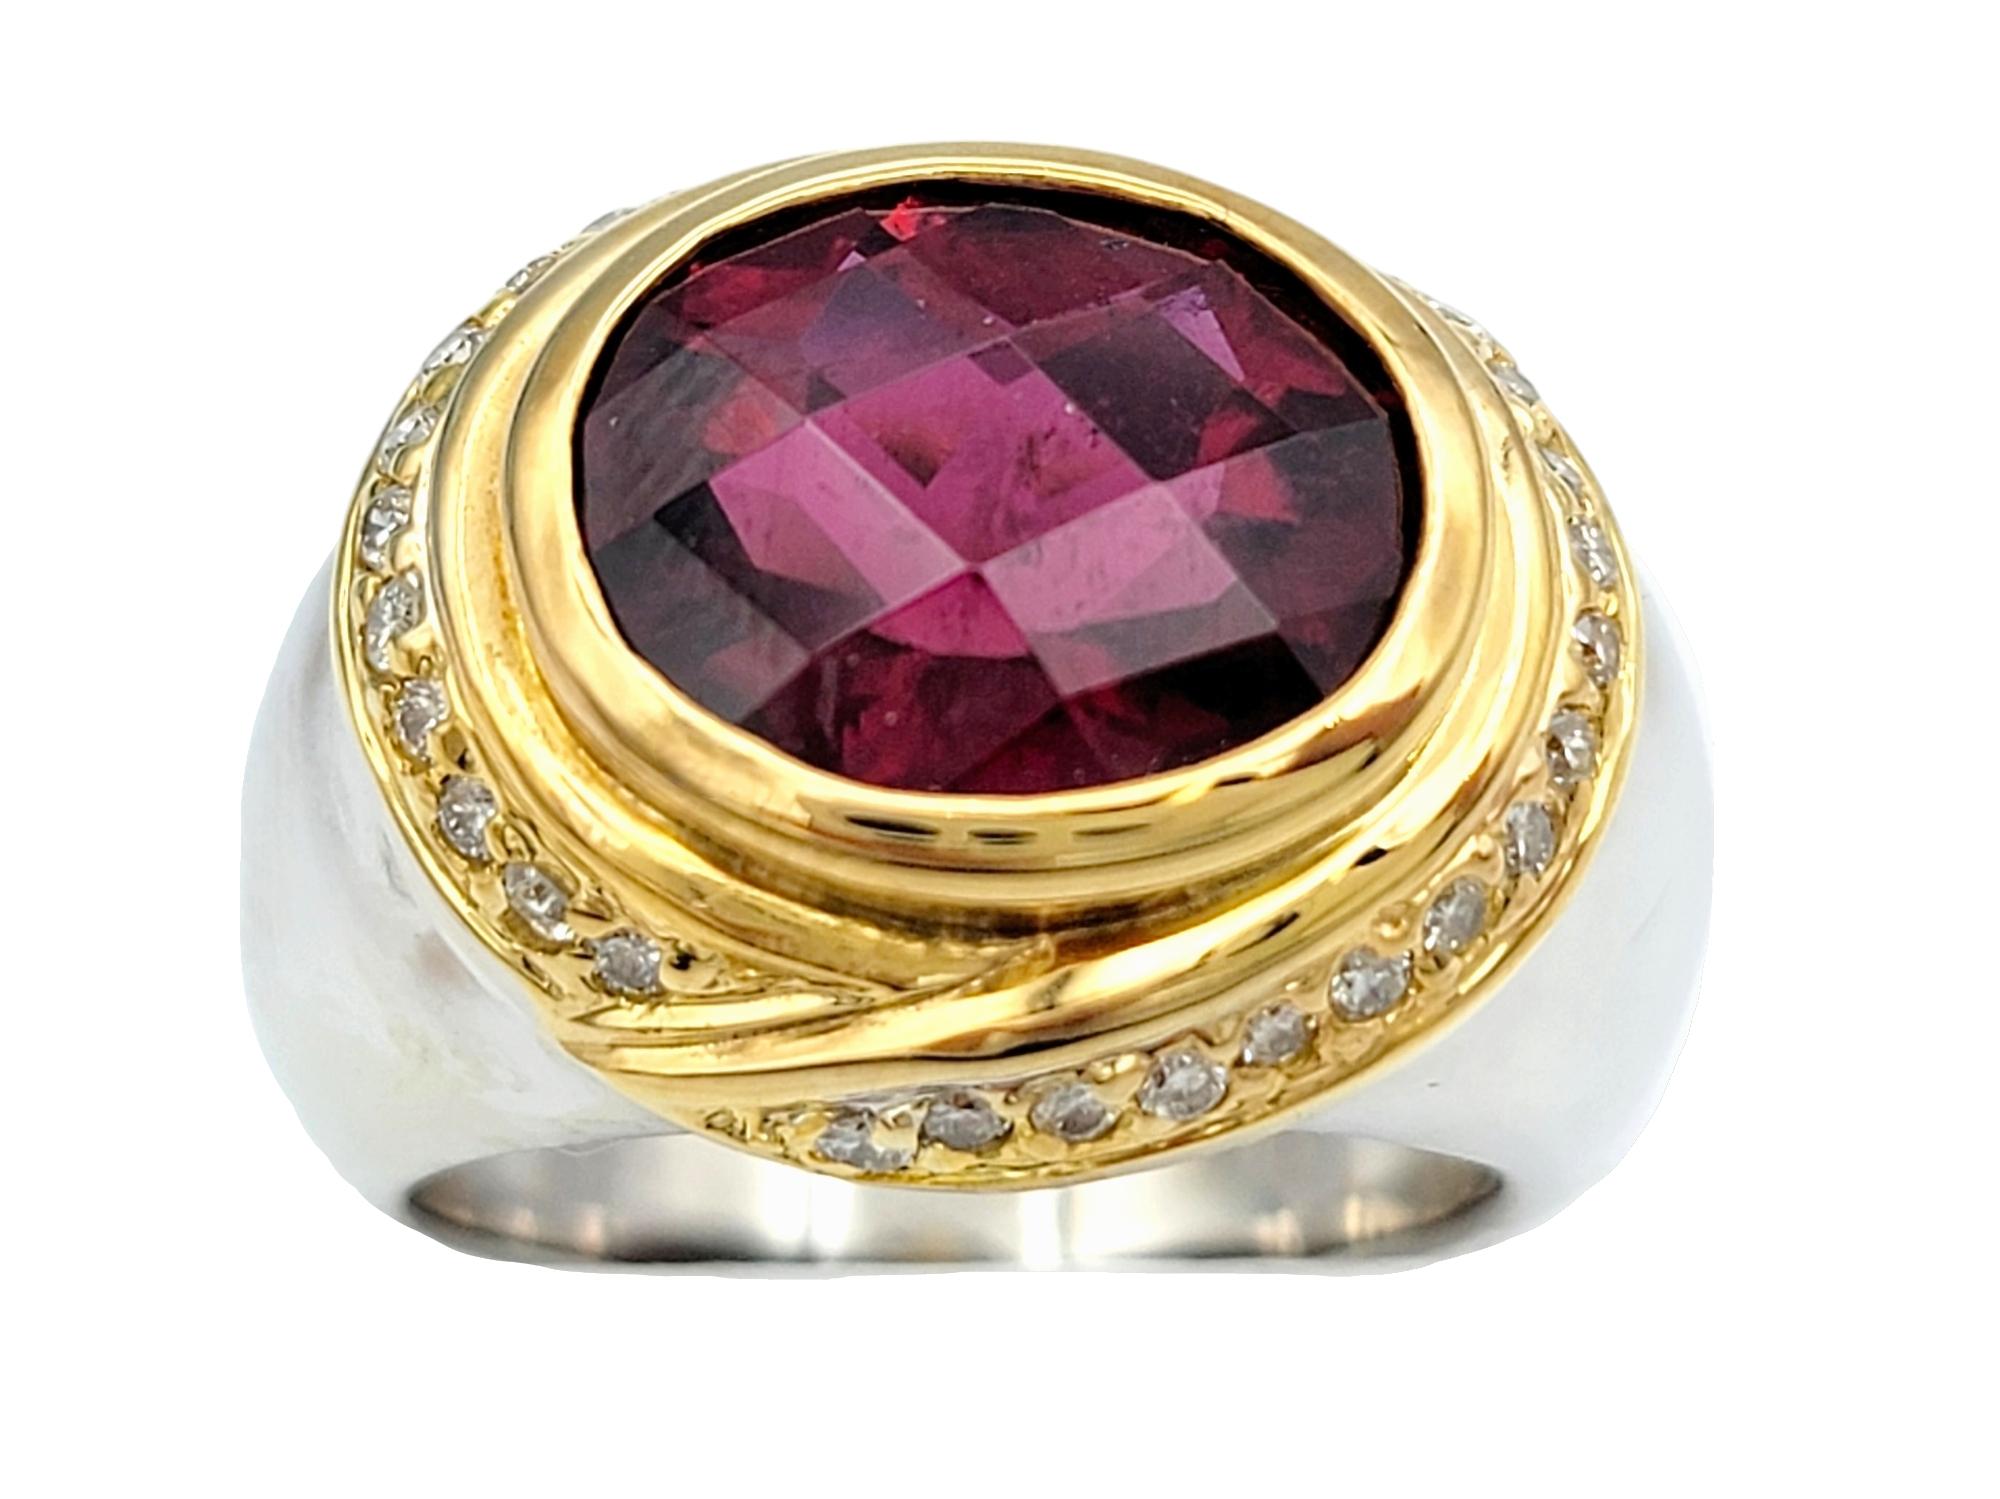 Ring size: 5.75

This remarkable ring, with its bold design and vibrant color, takes the classic cocktail ring and gives it a modern twist. The center of attention is a striking 4.73-carat checkerboard oval brilliant cut red tourmaline, cradled